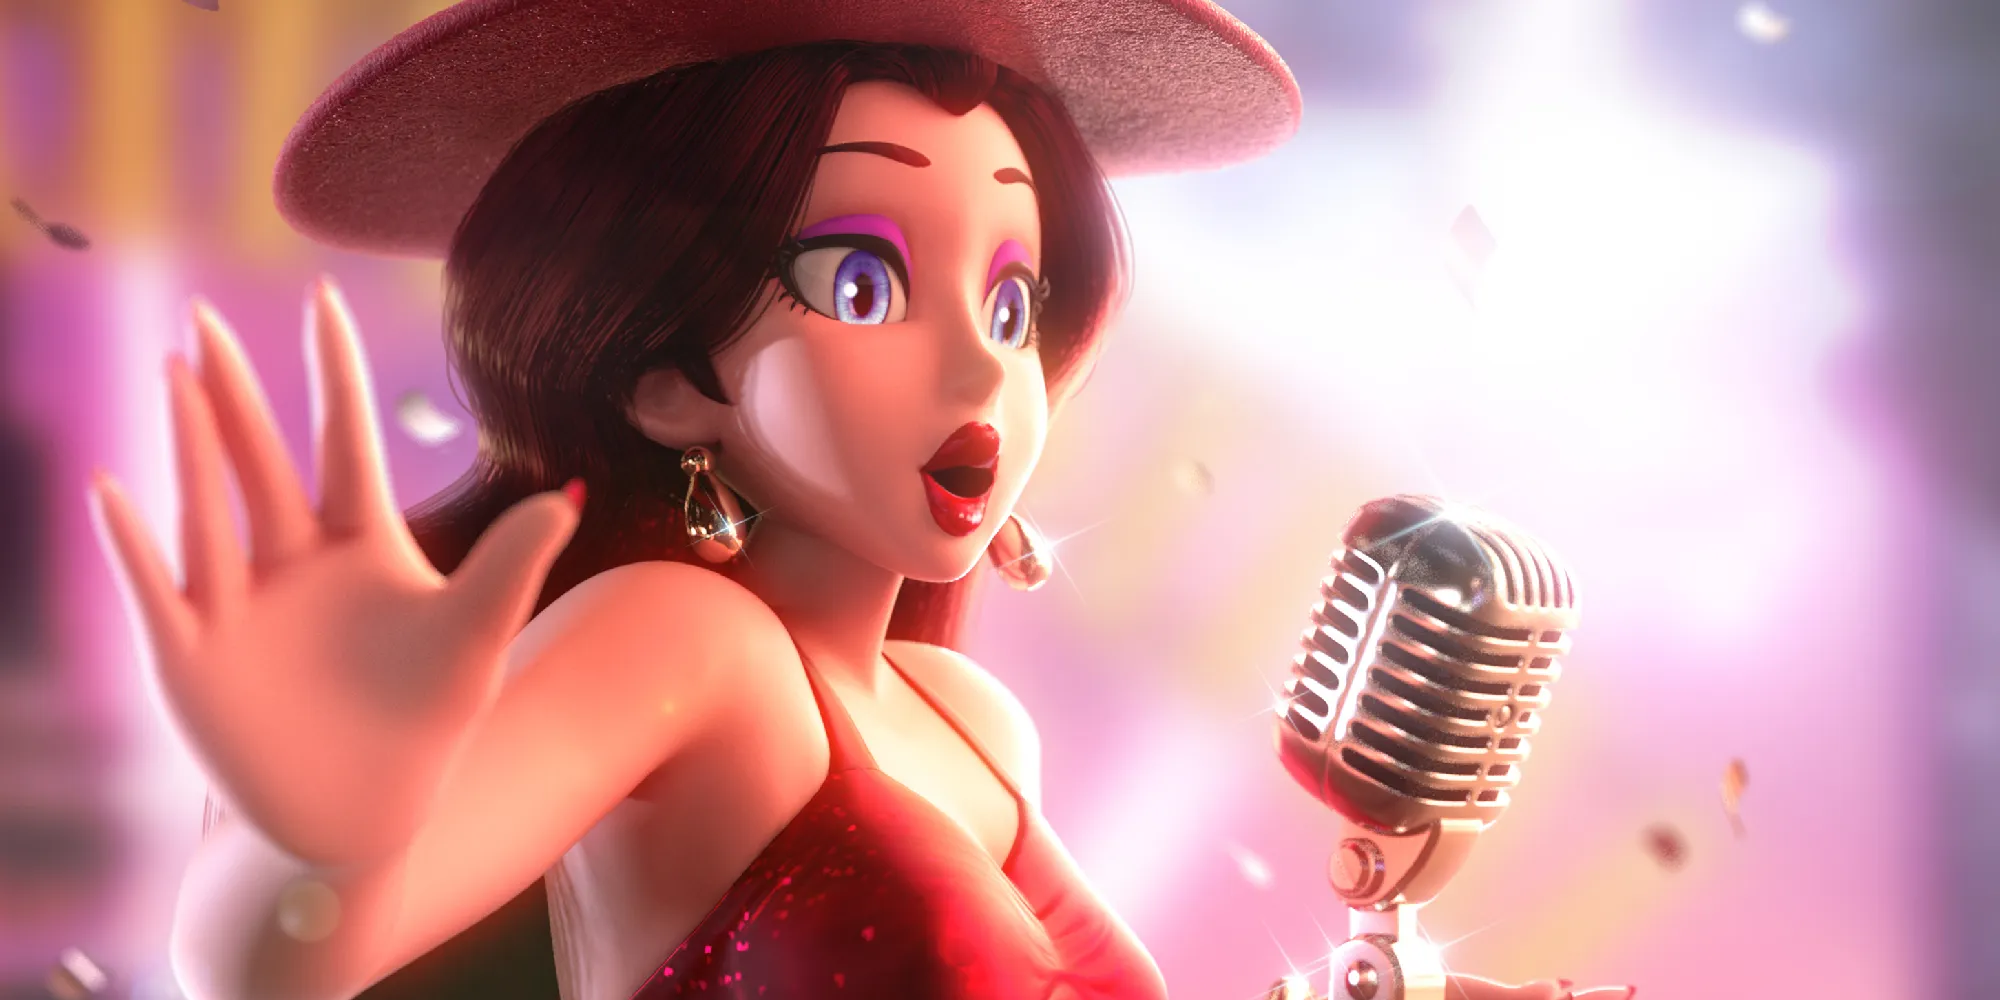 Pauline singing in a post card from Super Mario Odyssey